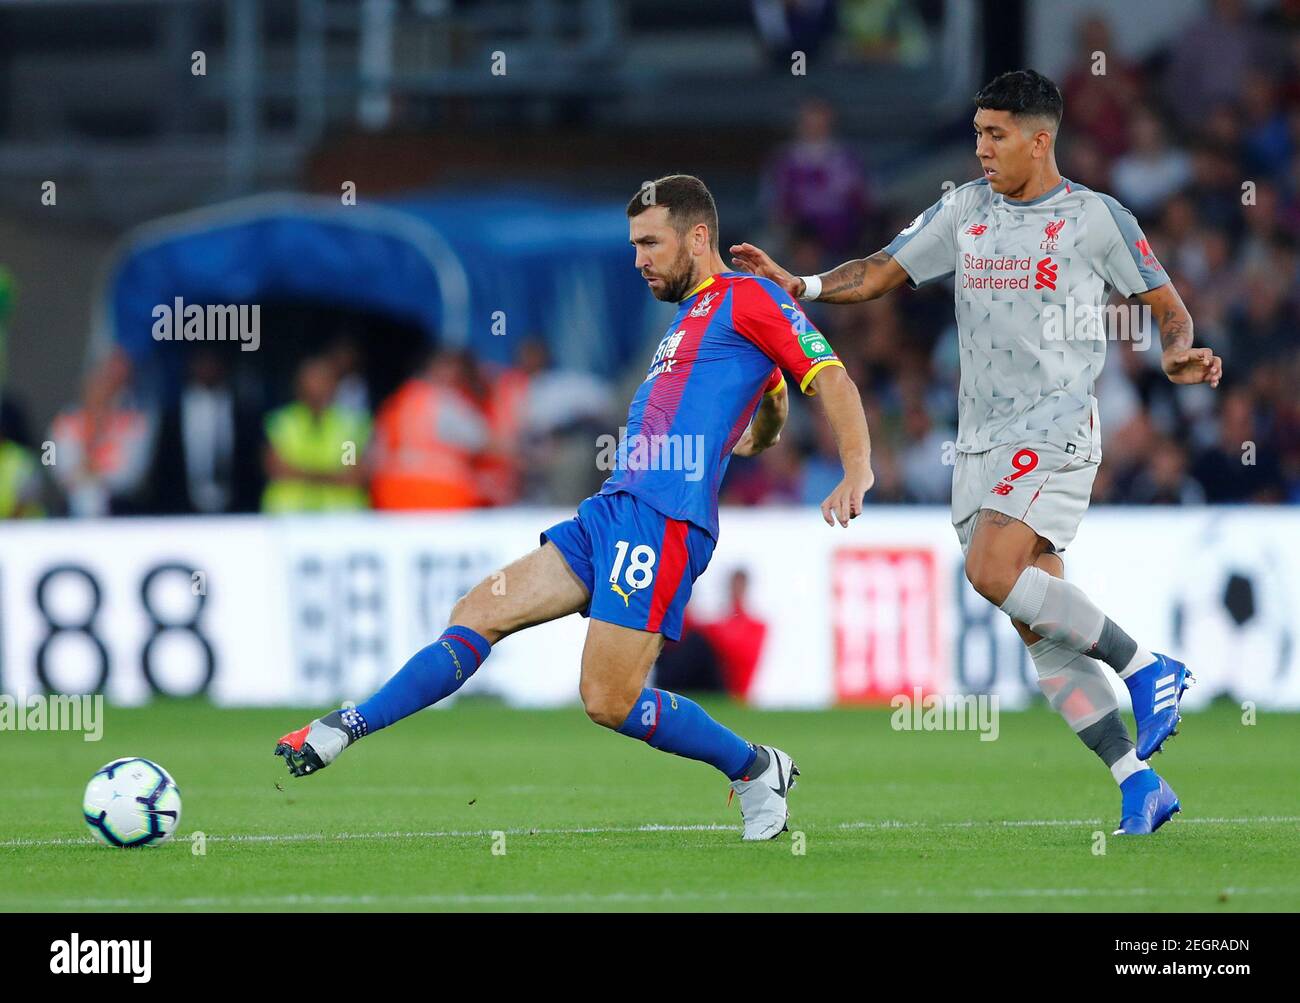 Soccer Football - Premier League - Crystal Palace v Liverpool - Selhurst Park, London, Britain - August 20, 2018  Crystal Palace's James McArthur in action with Liverpool's Roberto Firmino           REUTERS/Eddie Keogh  EDITORIAL USE ONLY. No use with unauthorized audio, video, data, fixture lists, club/league logos or 'live' services. Online in-match use limited to 75 images, no video emulation. No use in betting, games or single club/league/player publications.  Please contact your account representative for further details. Stock Photo